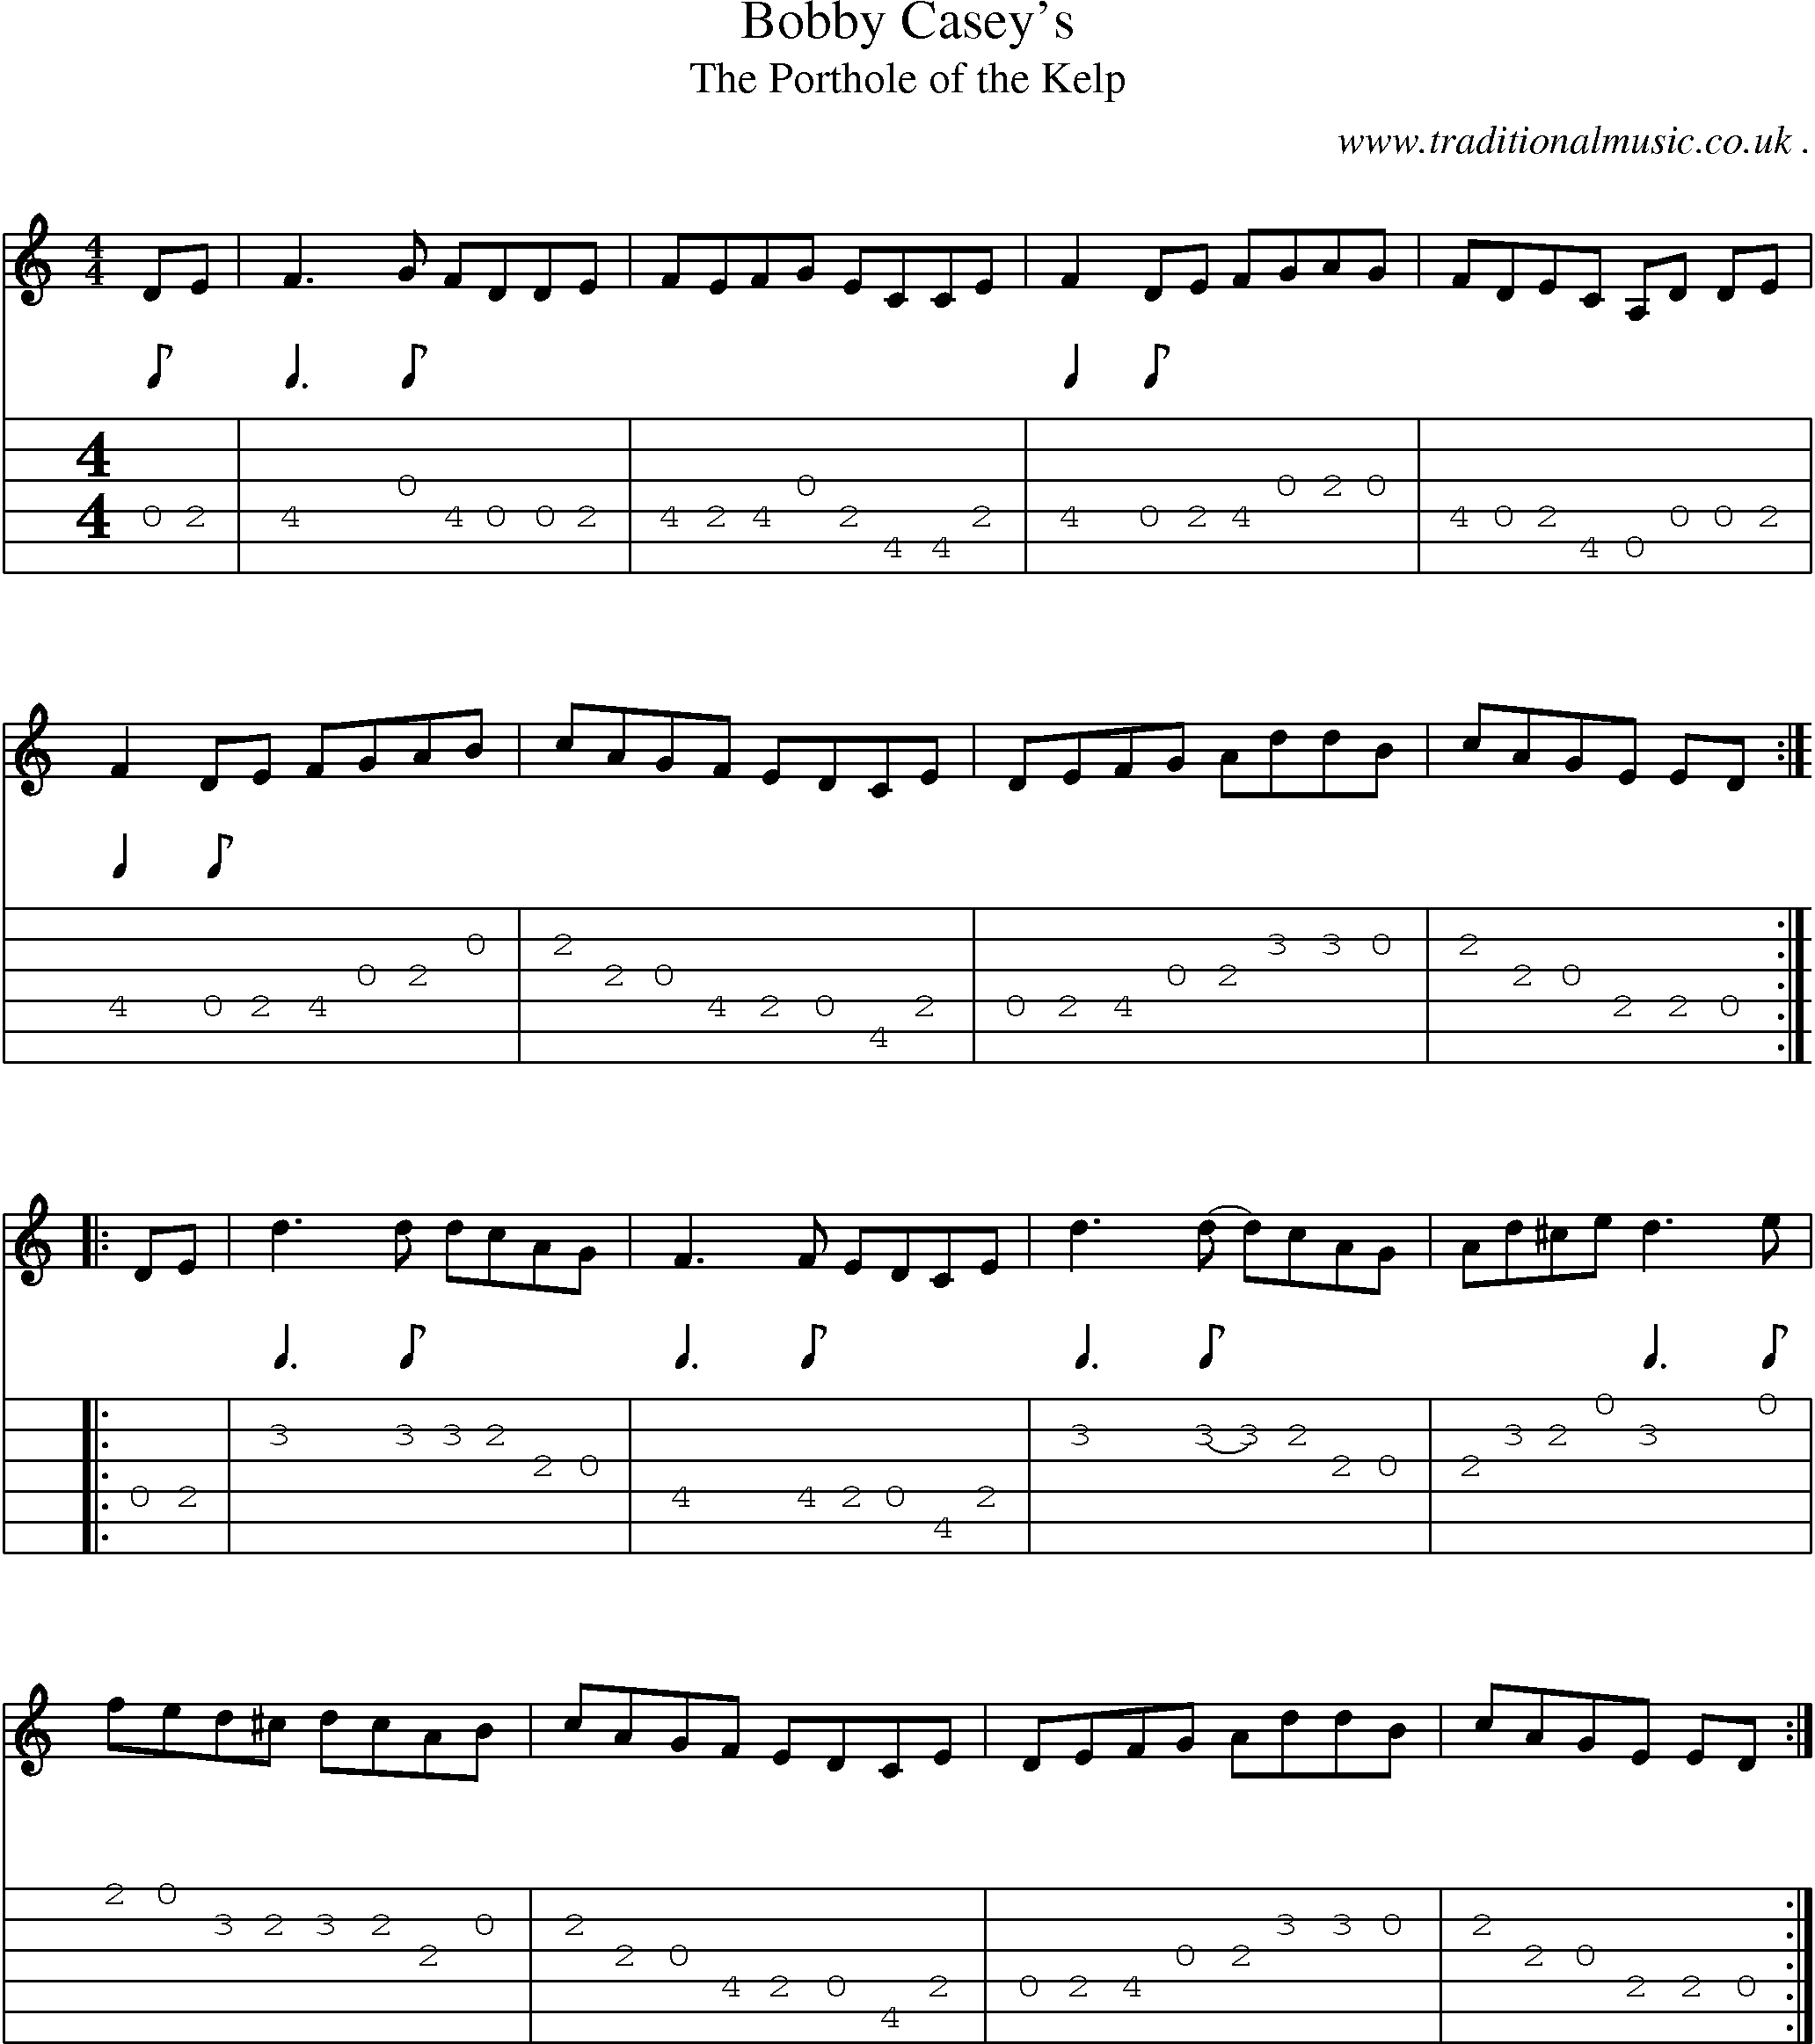 Sheet-Music and Guitar Tabs for Bobby Caseys